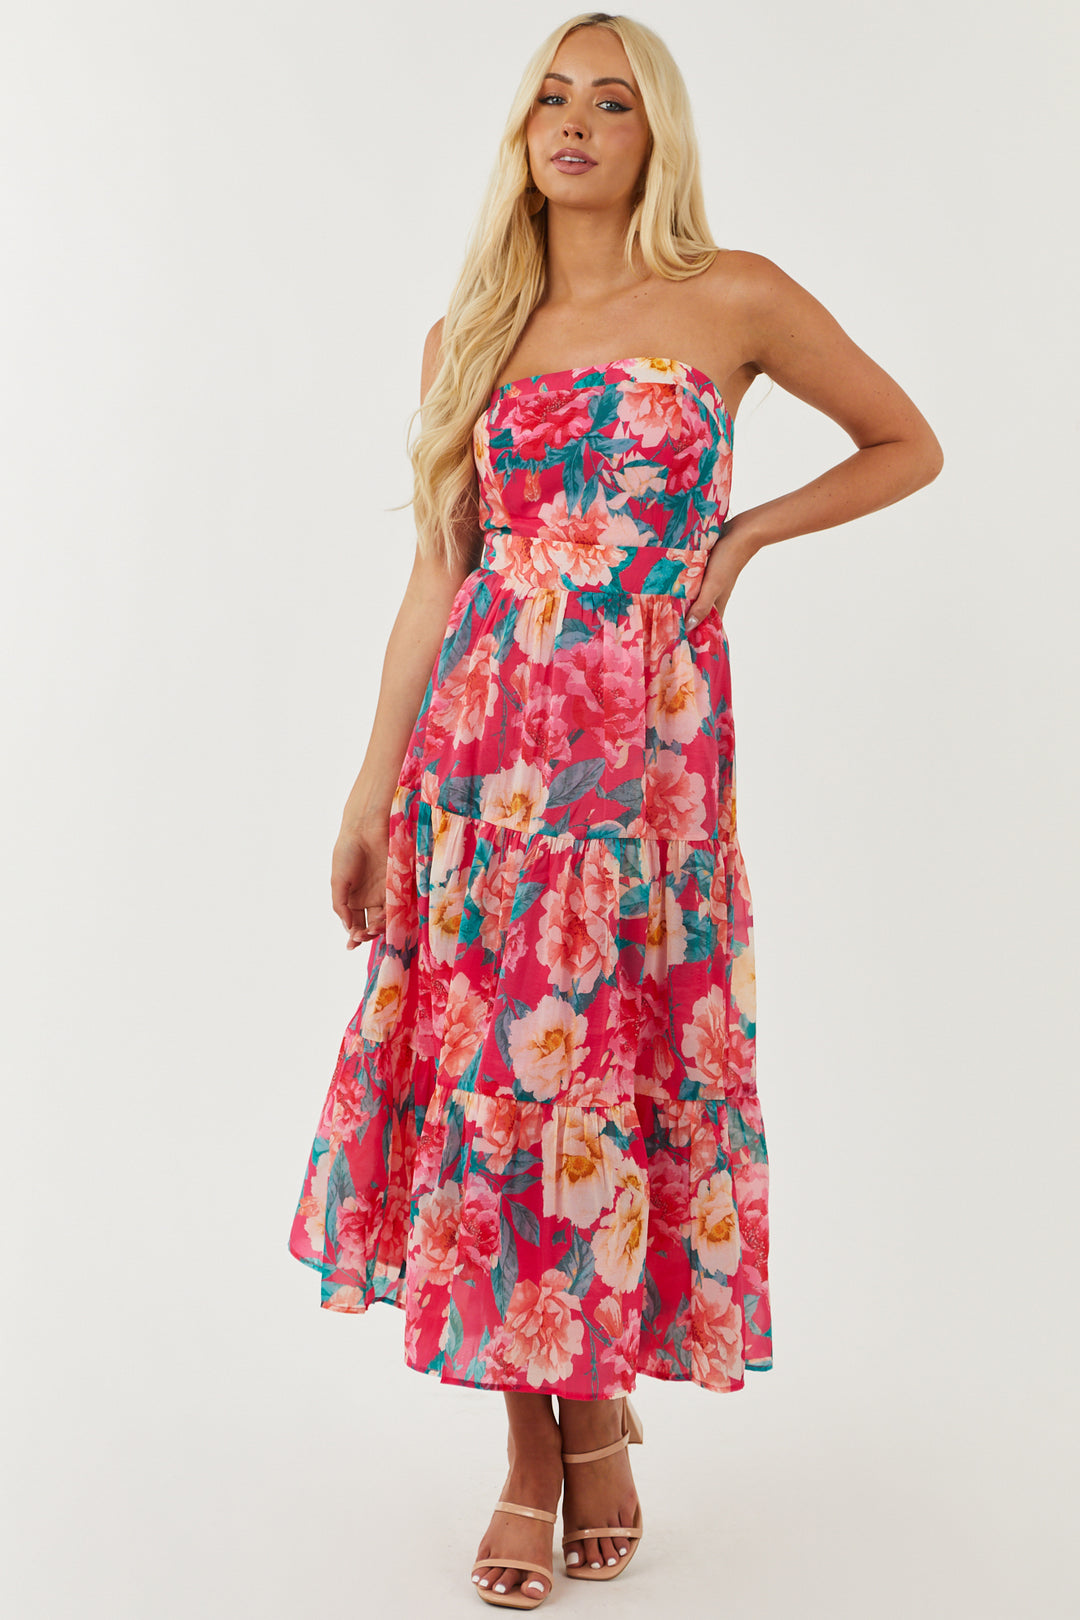 Flying Tomato Hot Pink Floral Print Strapless Tiered Dress & Lime Lush